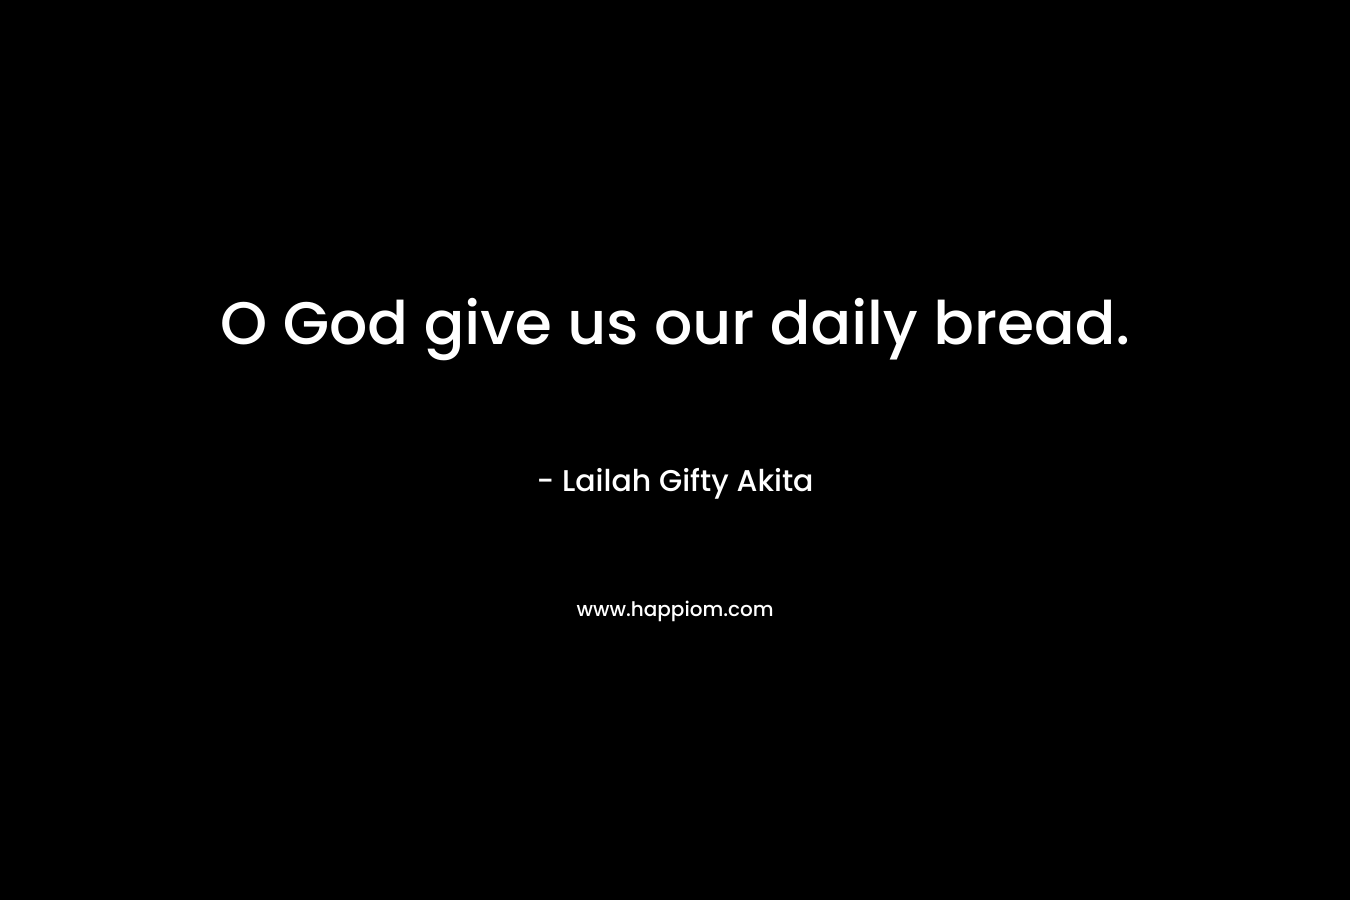 O God give us our daily bread.